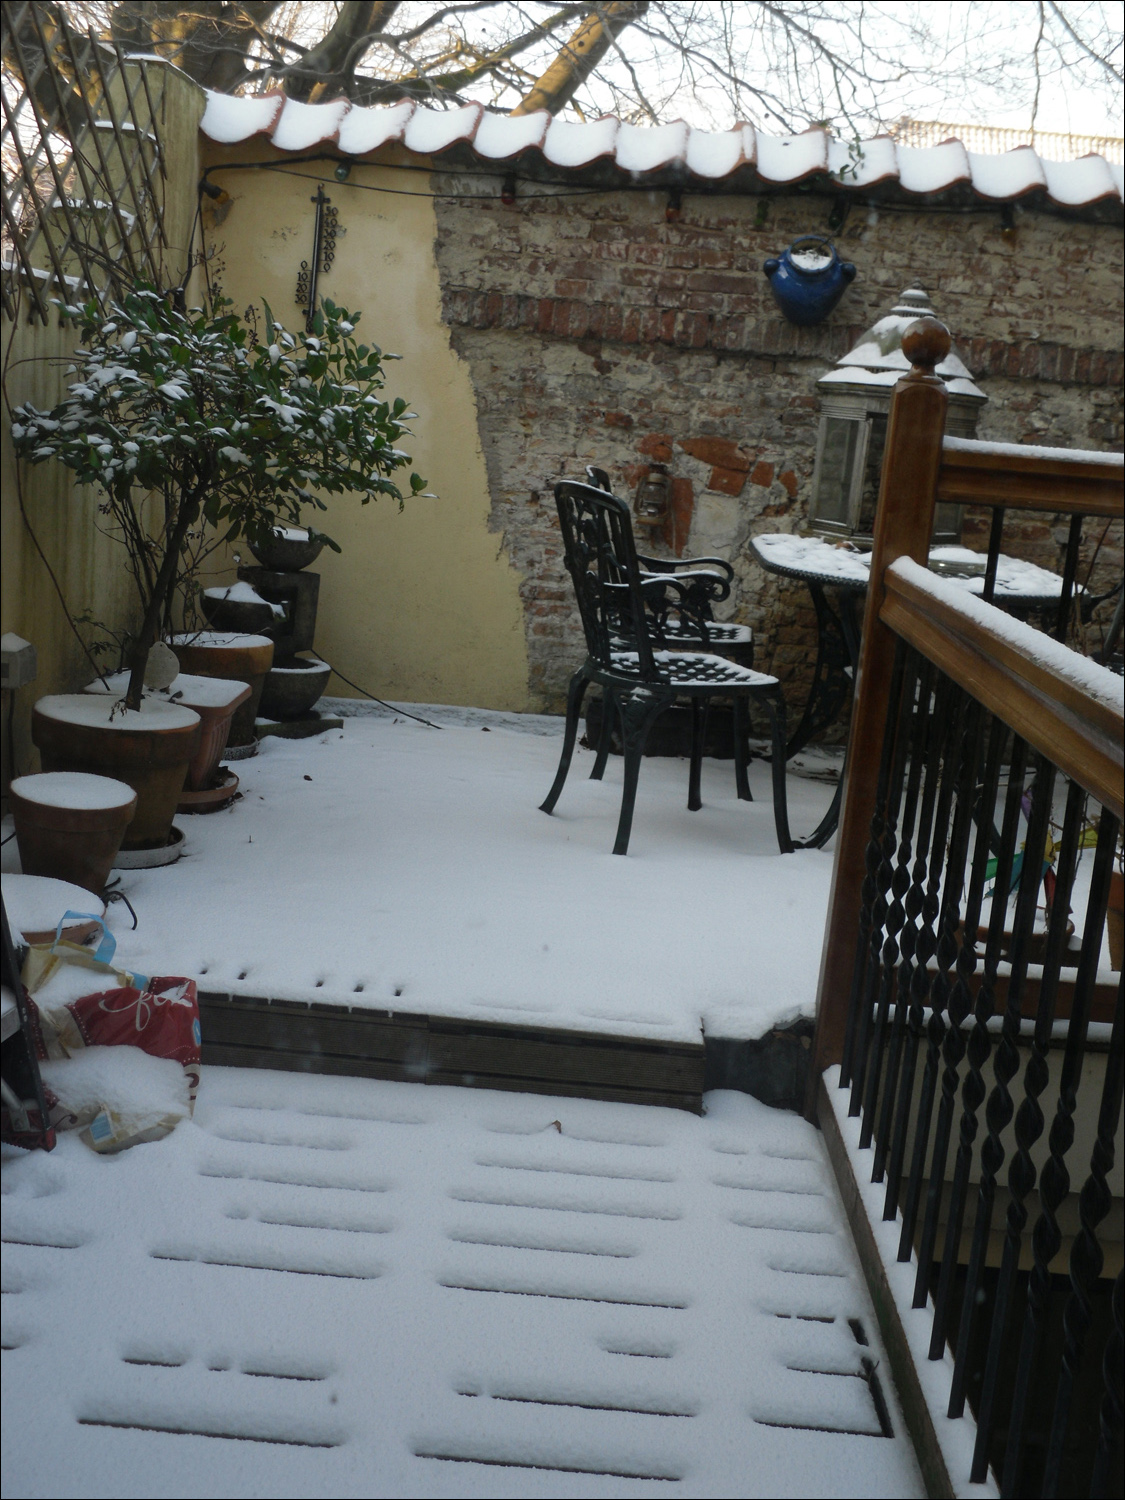 Outside patio of Delft house after snow